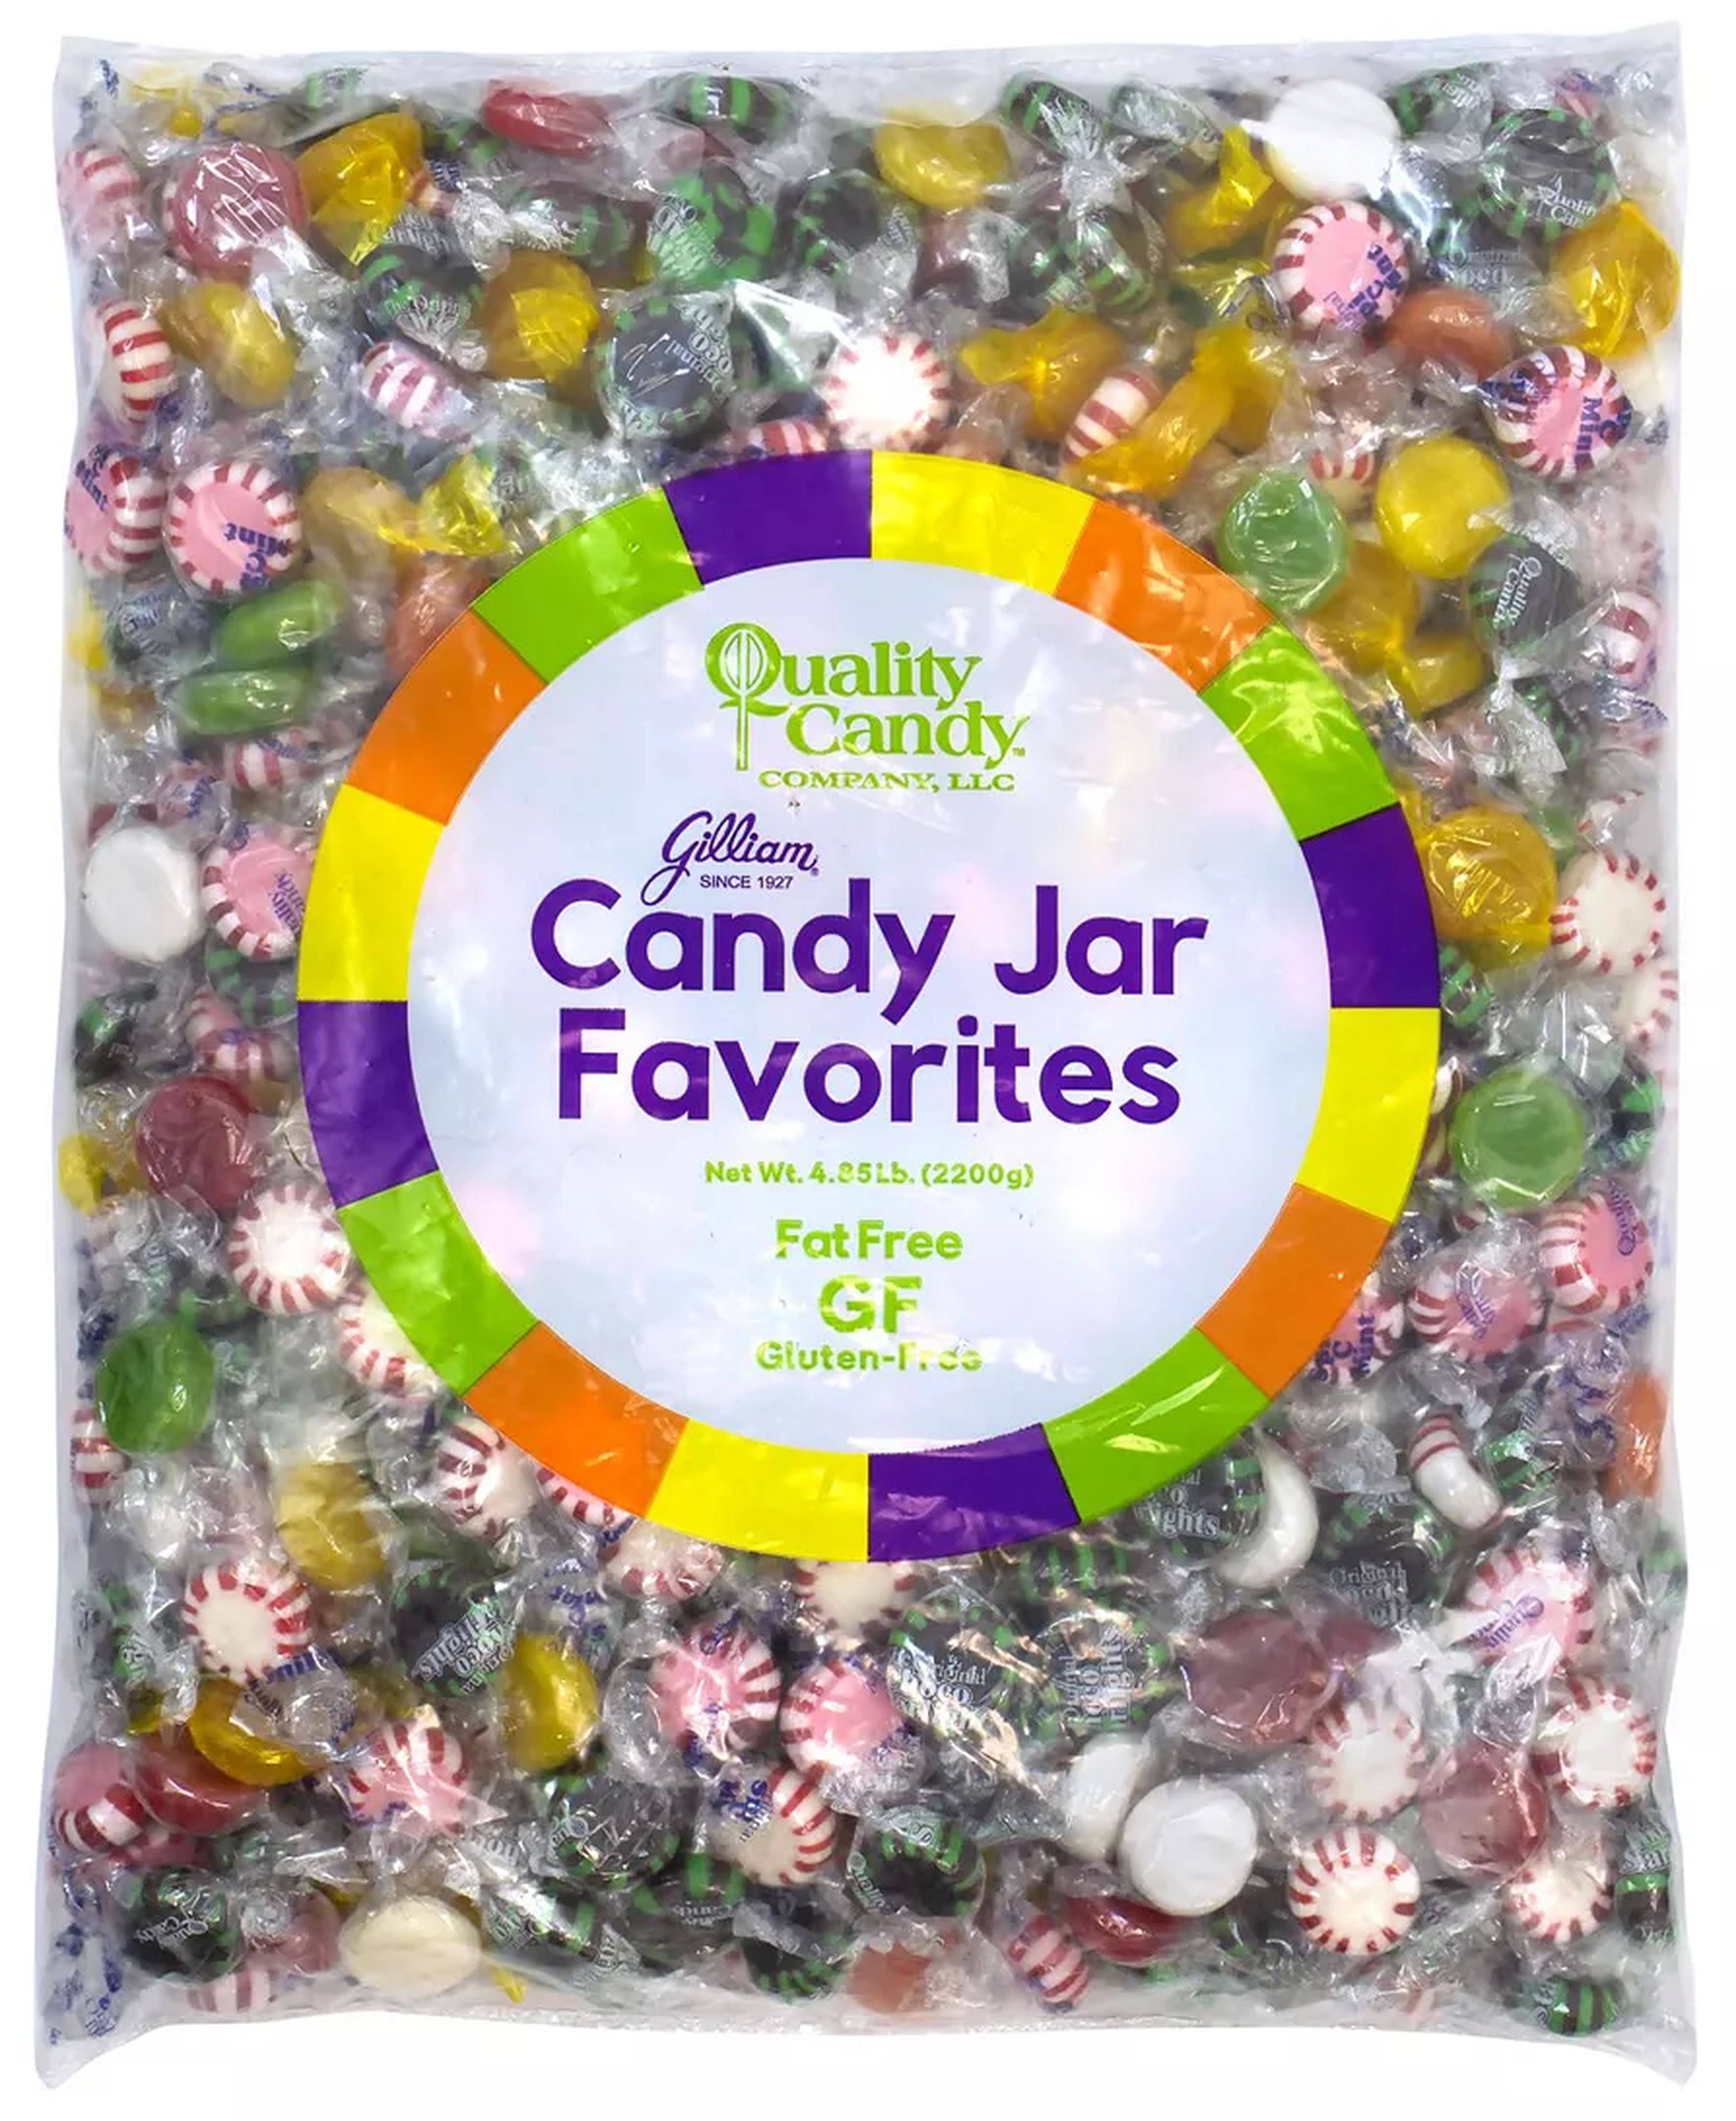 Quality Candy - Assorted Candy Jar Favorites - 5 lb Bag